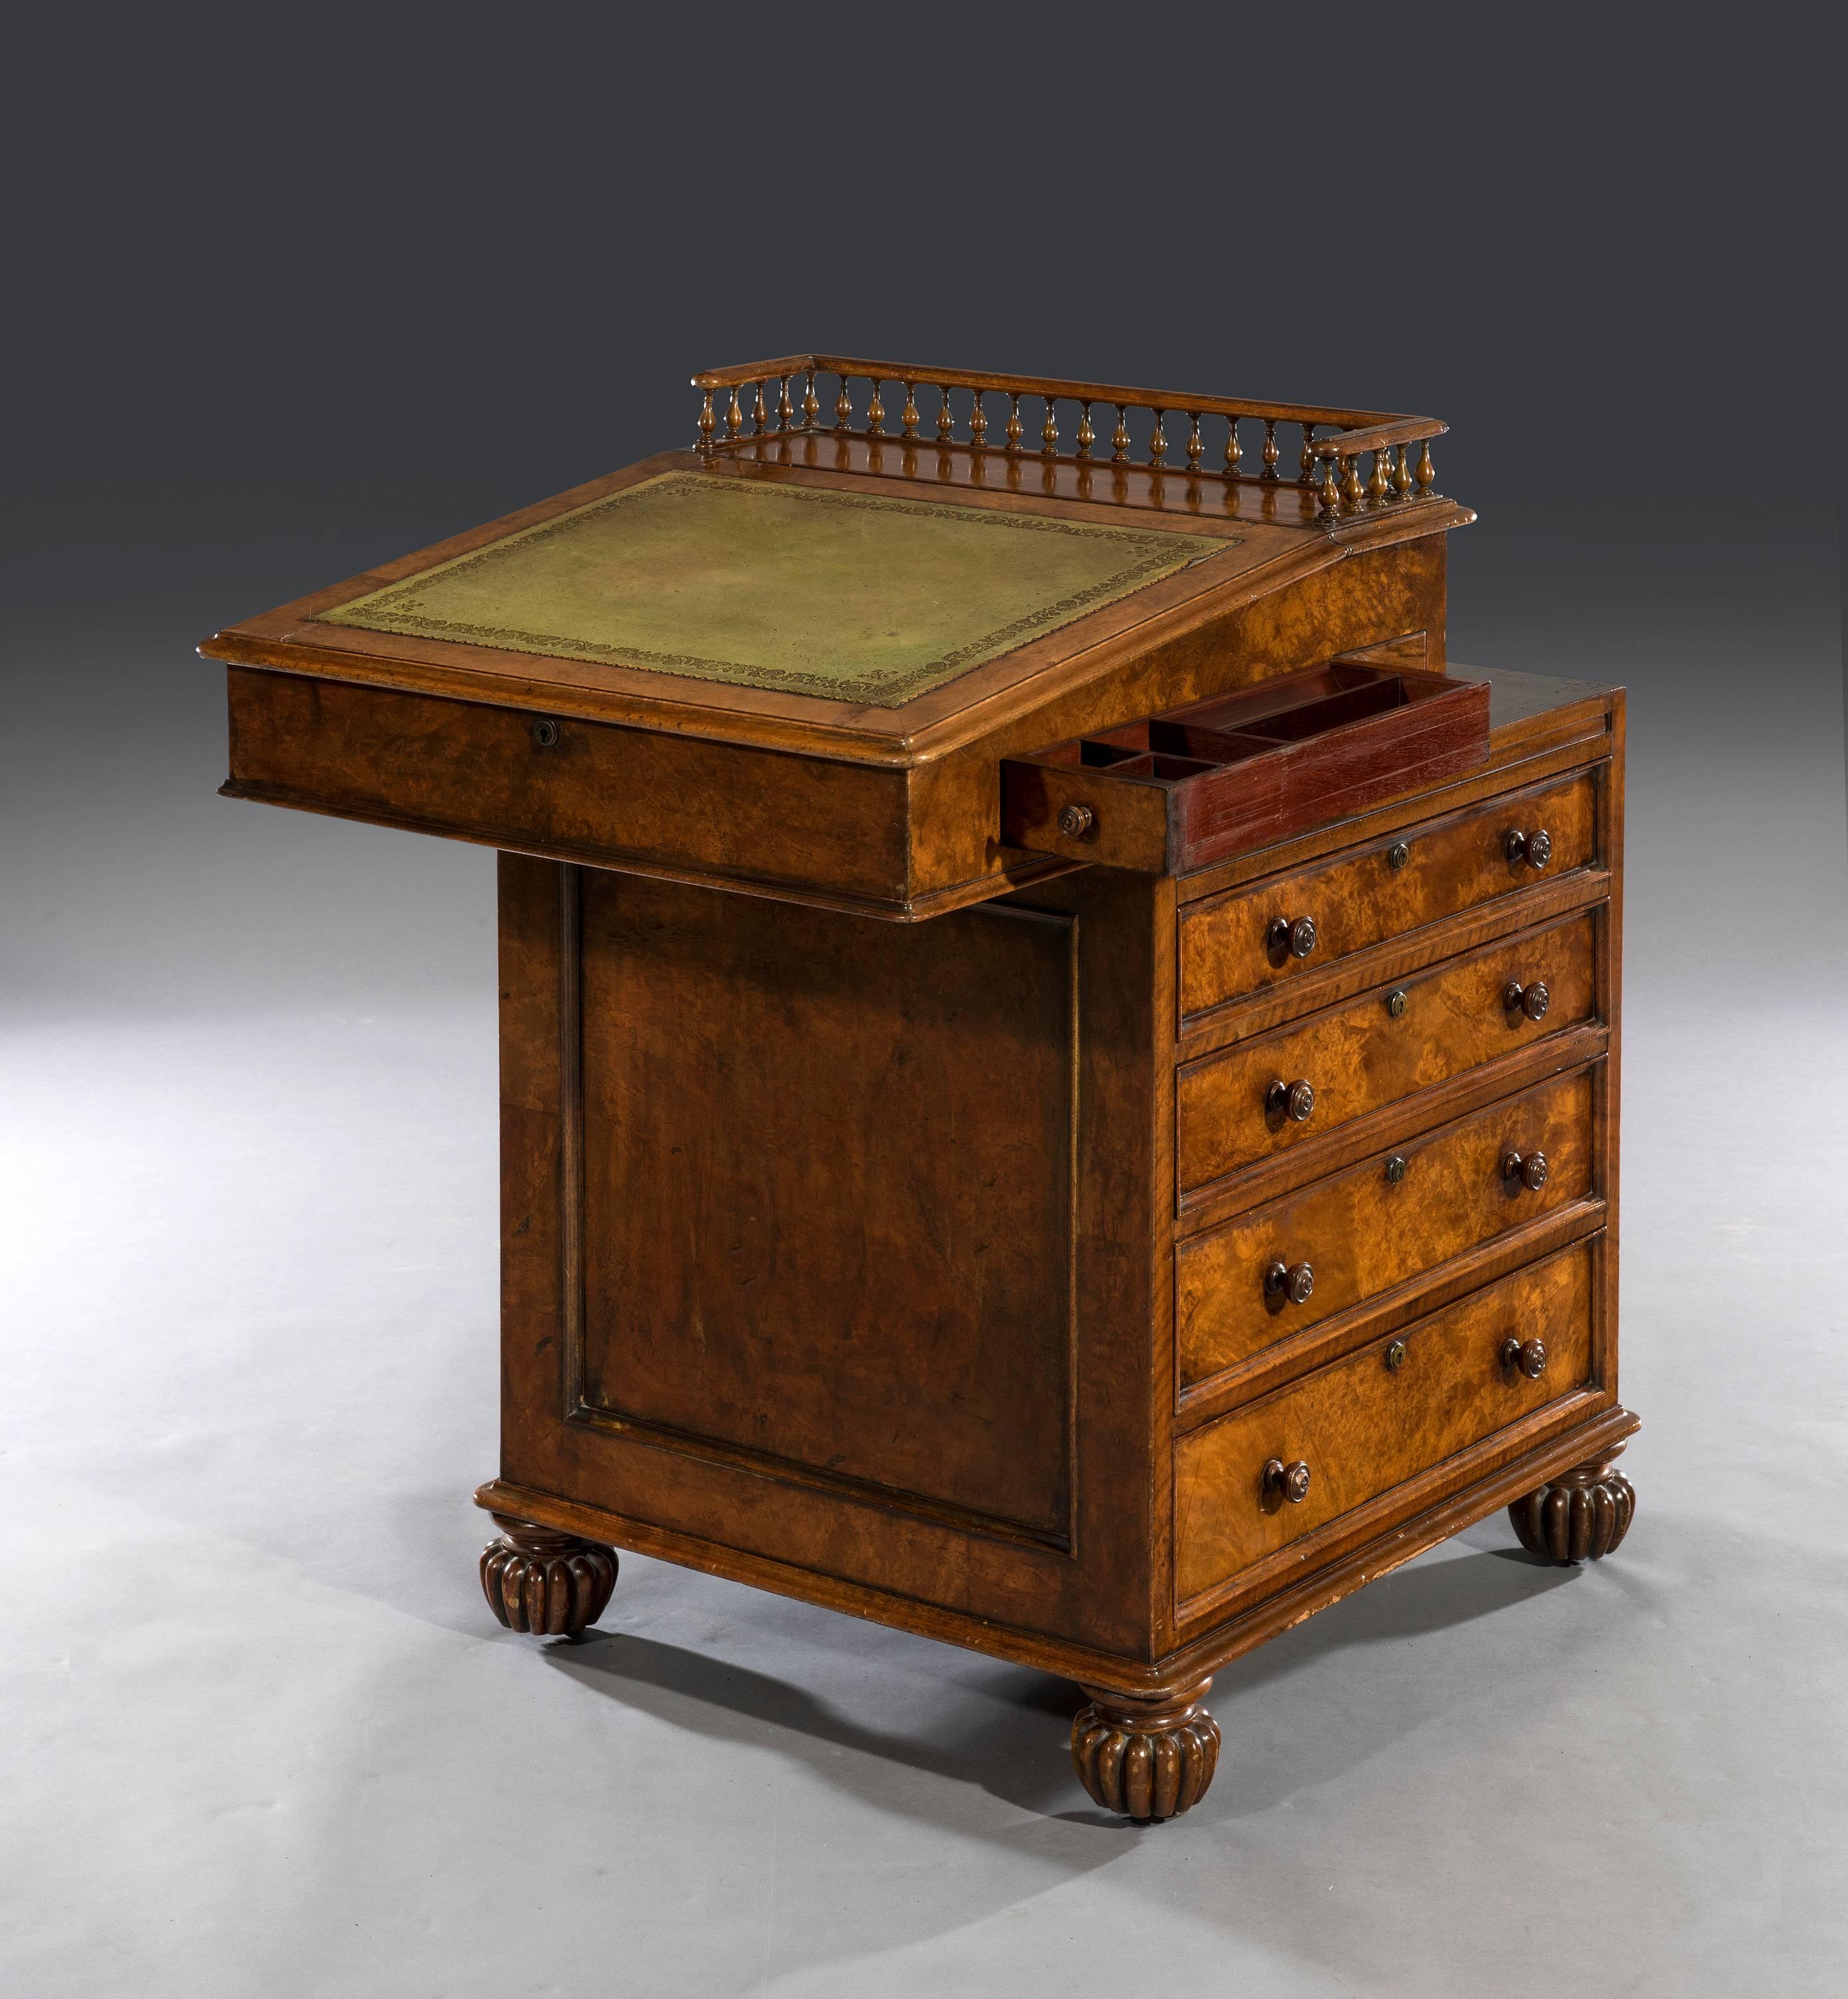 The davenport's walnut gallery is crisply carved with turned baluster-shaped supports above a green leathered writing slope. The rectangular walnut top is veneered with a thumb-nail bevelled edge above a highly figured burr walnut frieze. The frieze